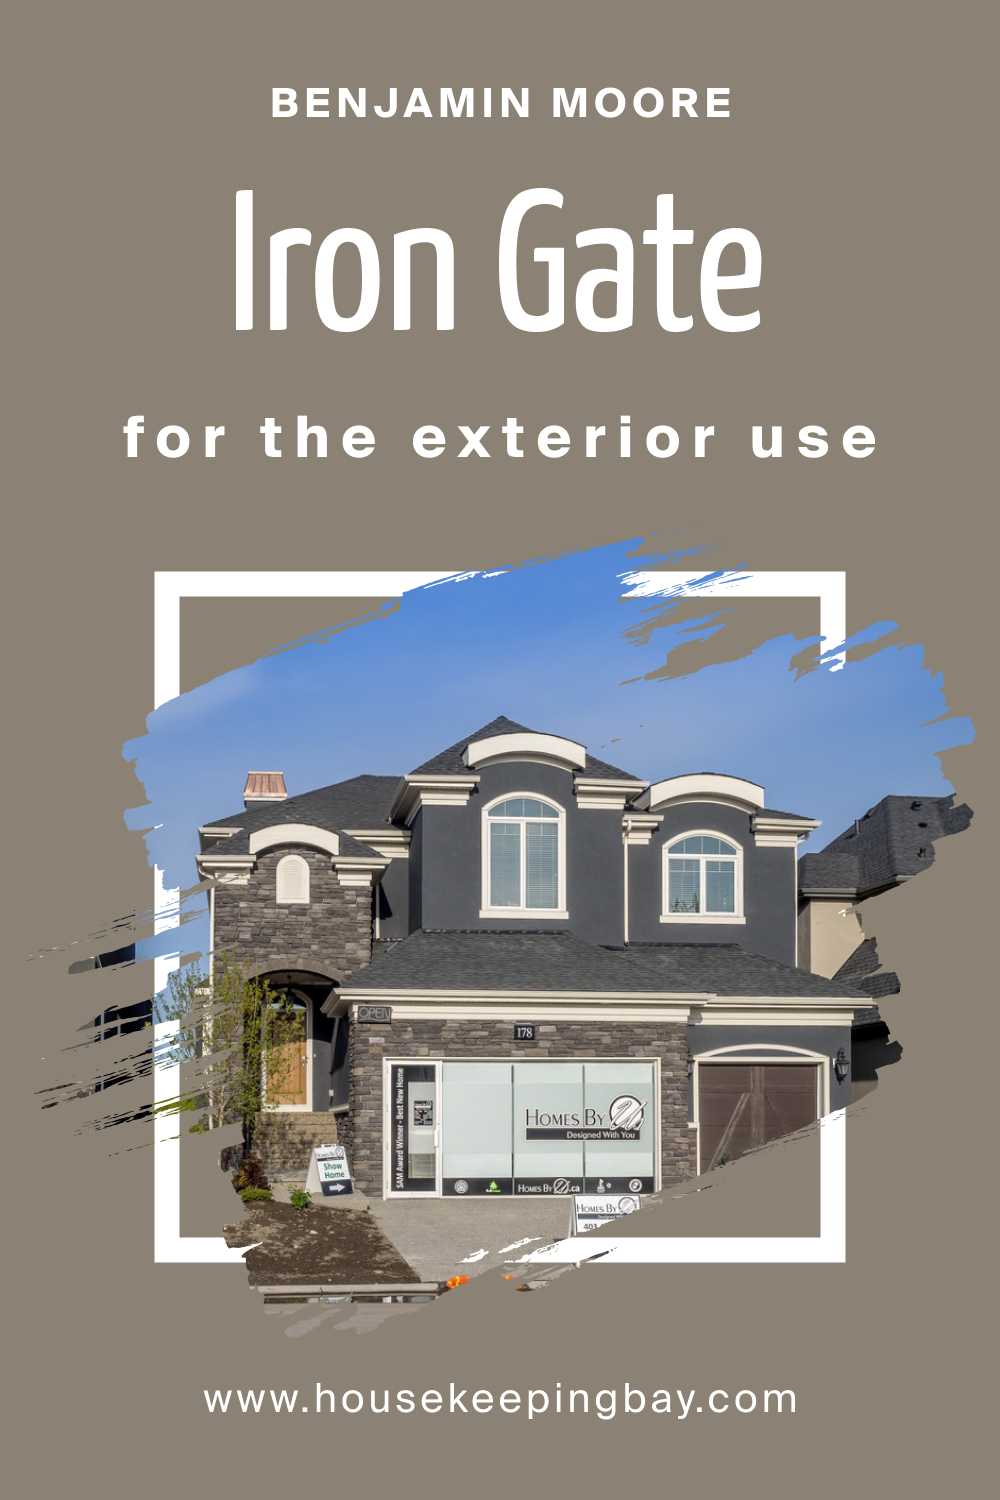 How to Use BM Iron Gate 1545 for an Exterior?